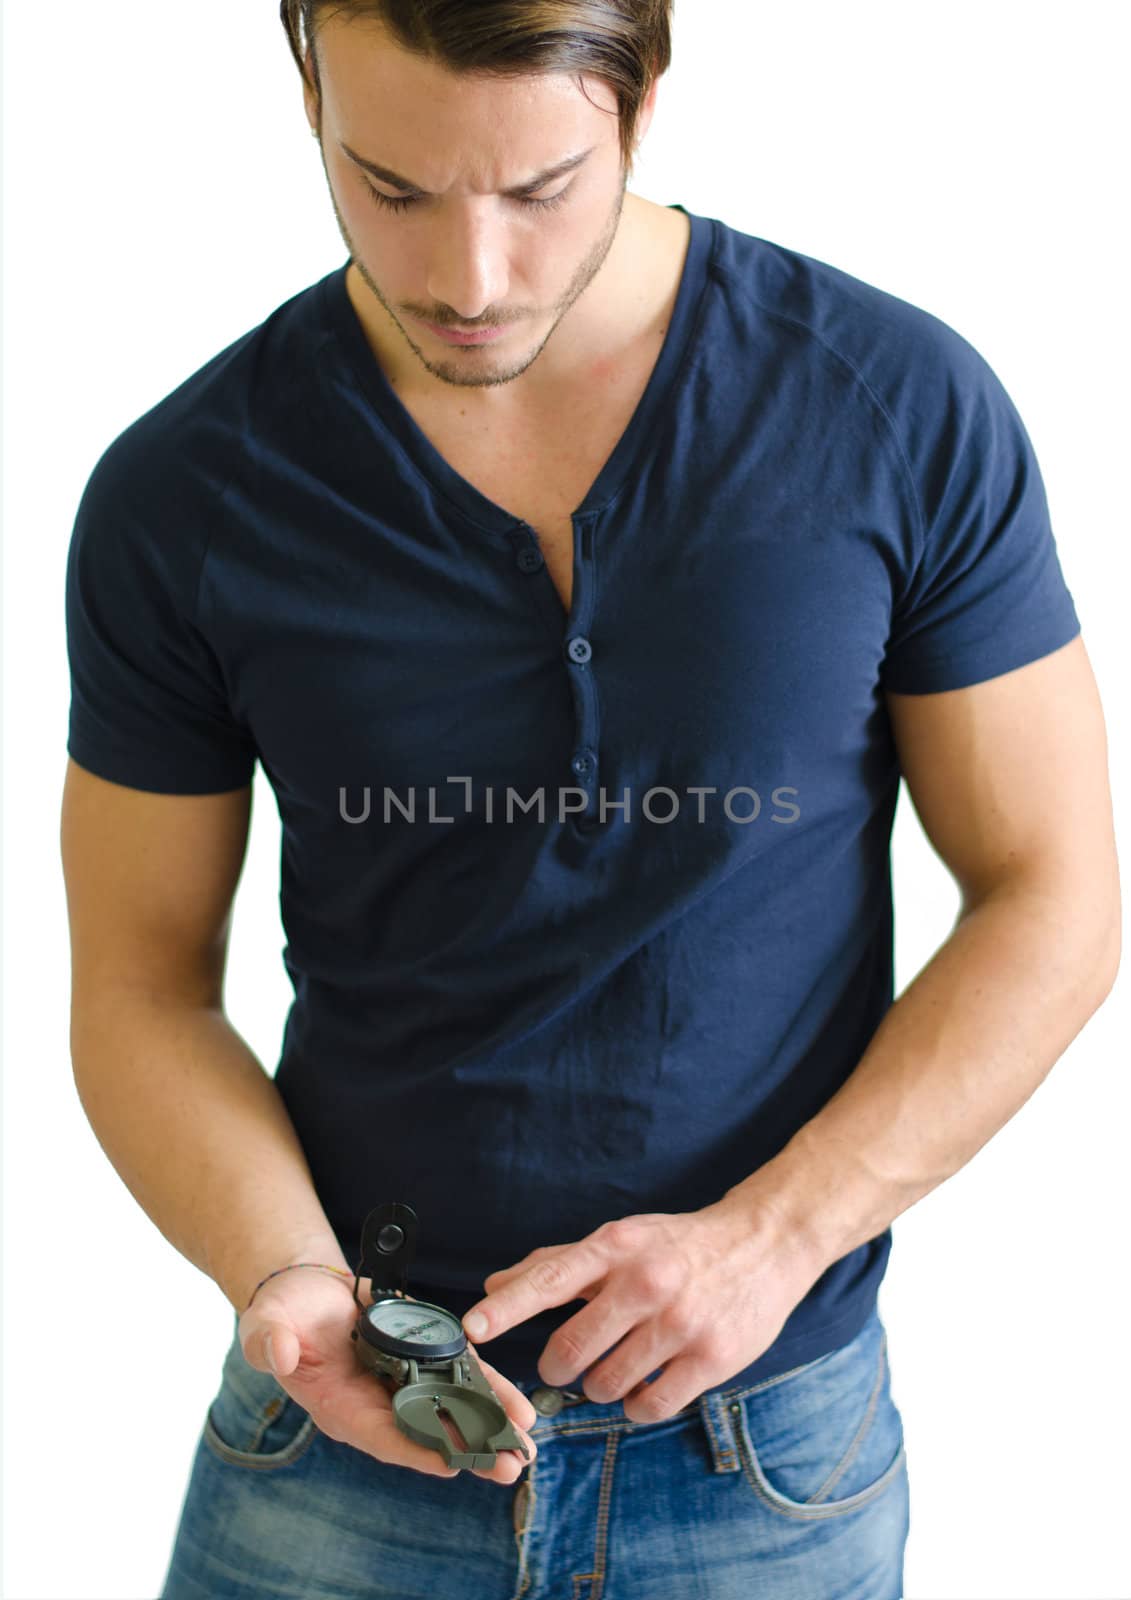 Attractive young man standing with compass in his hand by artofphoto